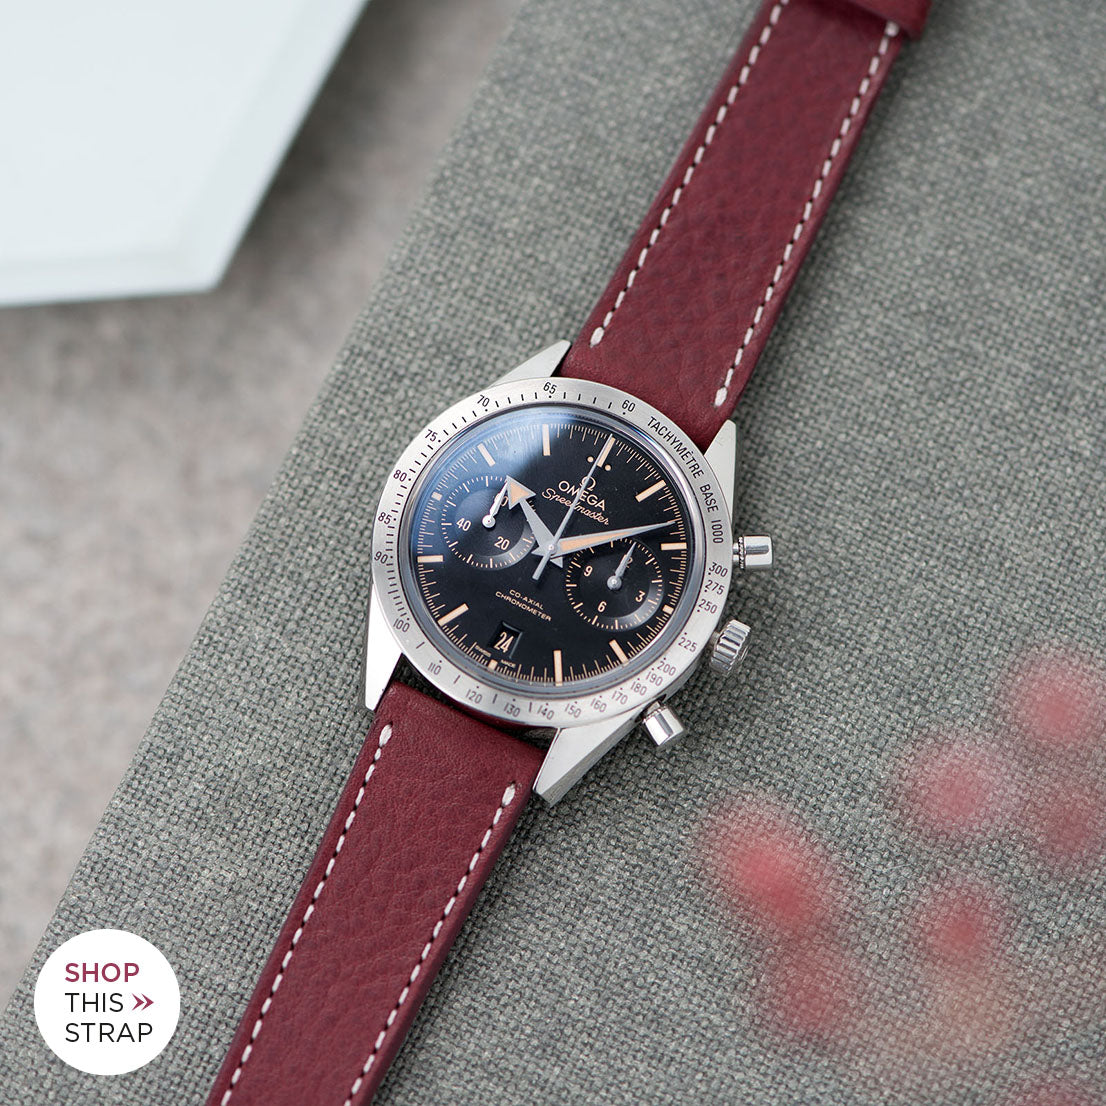 Bulang and Sons_Strap Guide_The Omega Speedmaster ’57 Co-Axial Chronograph_Burgundy Red Leather Watch Strap